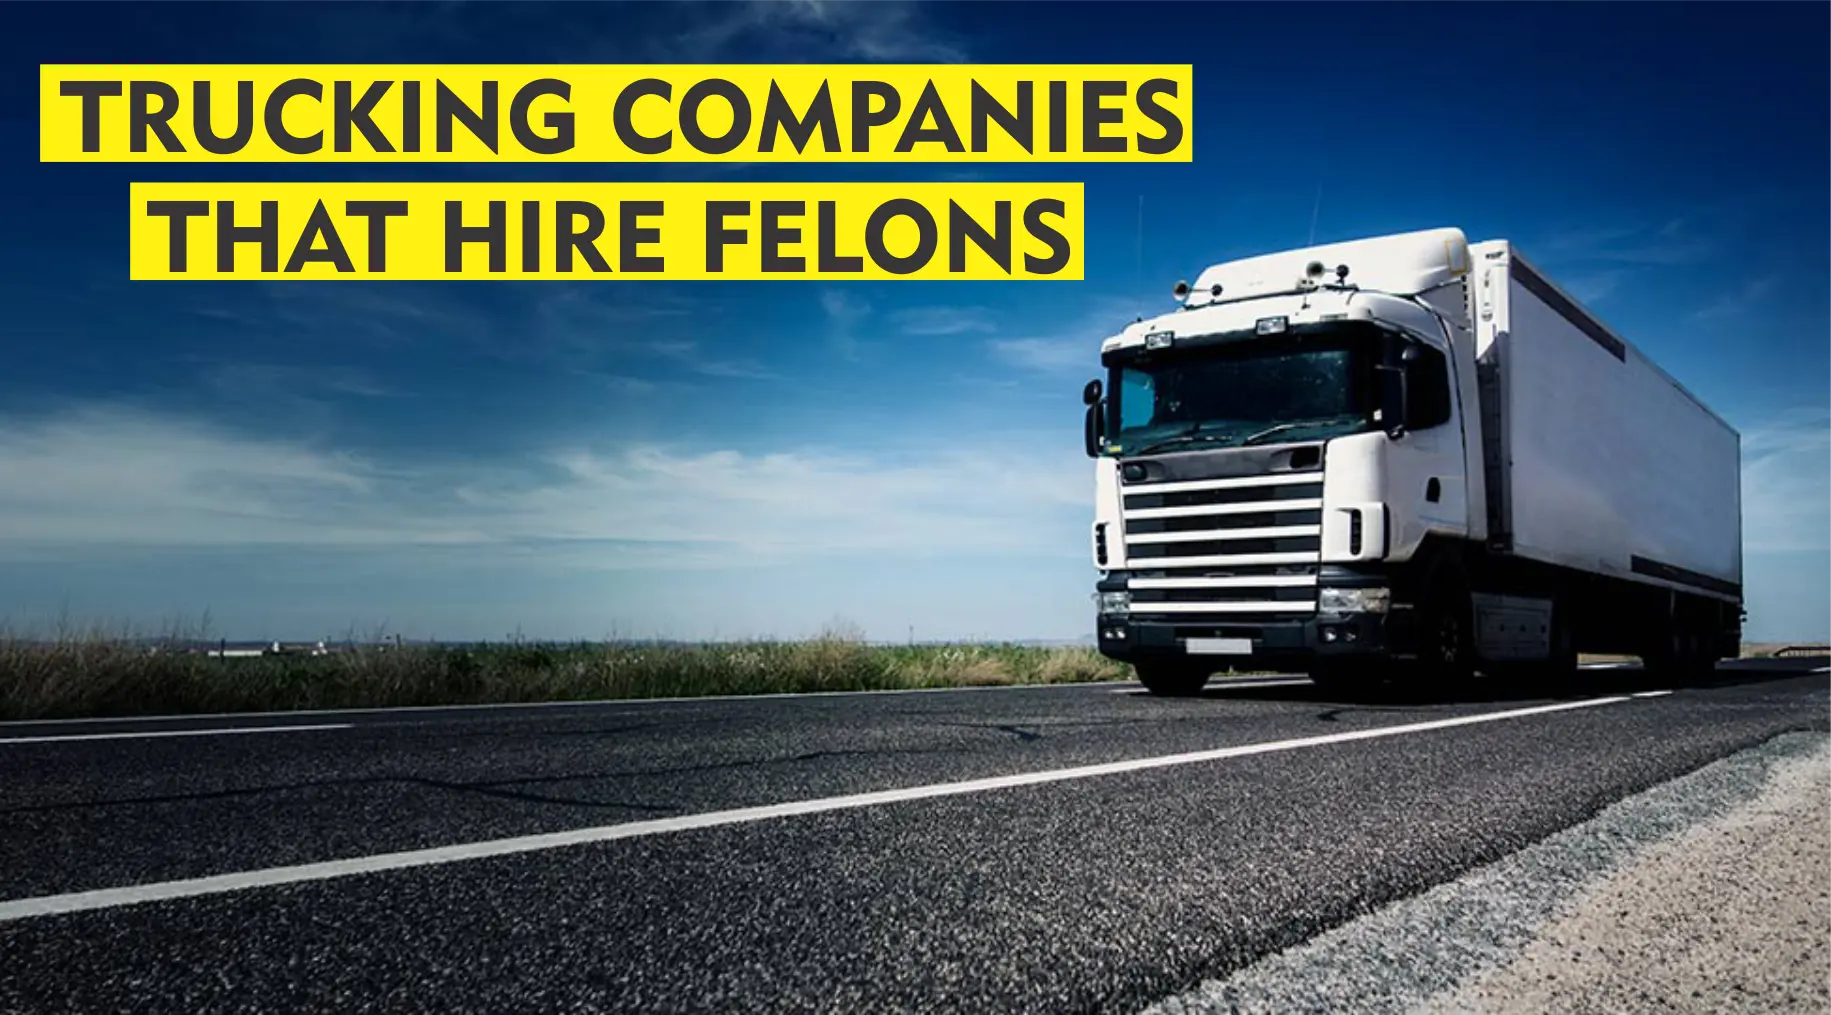 TRUCKING COMPANIES THAT HIRE FELONS